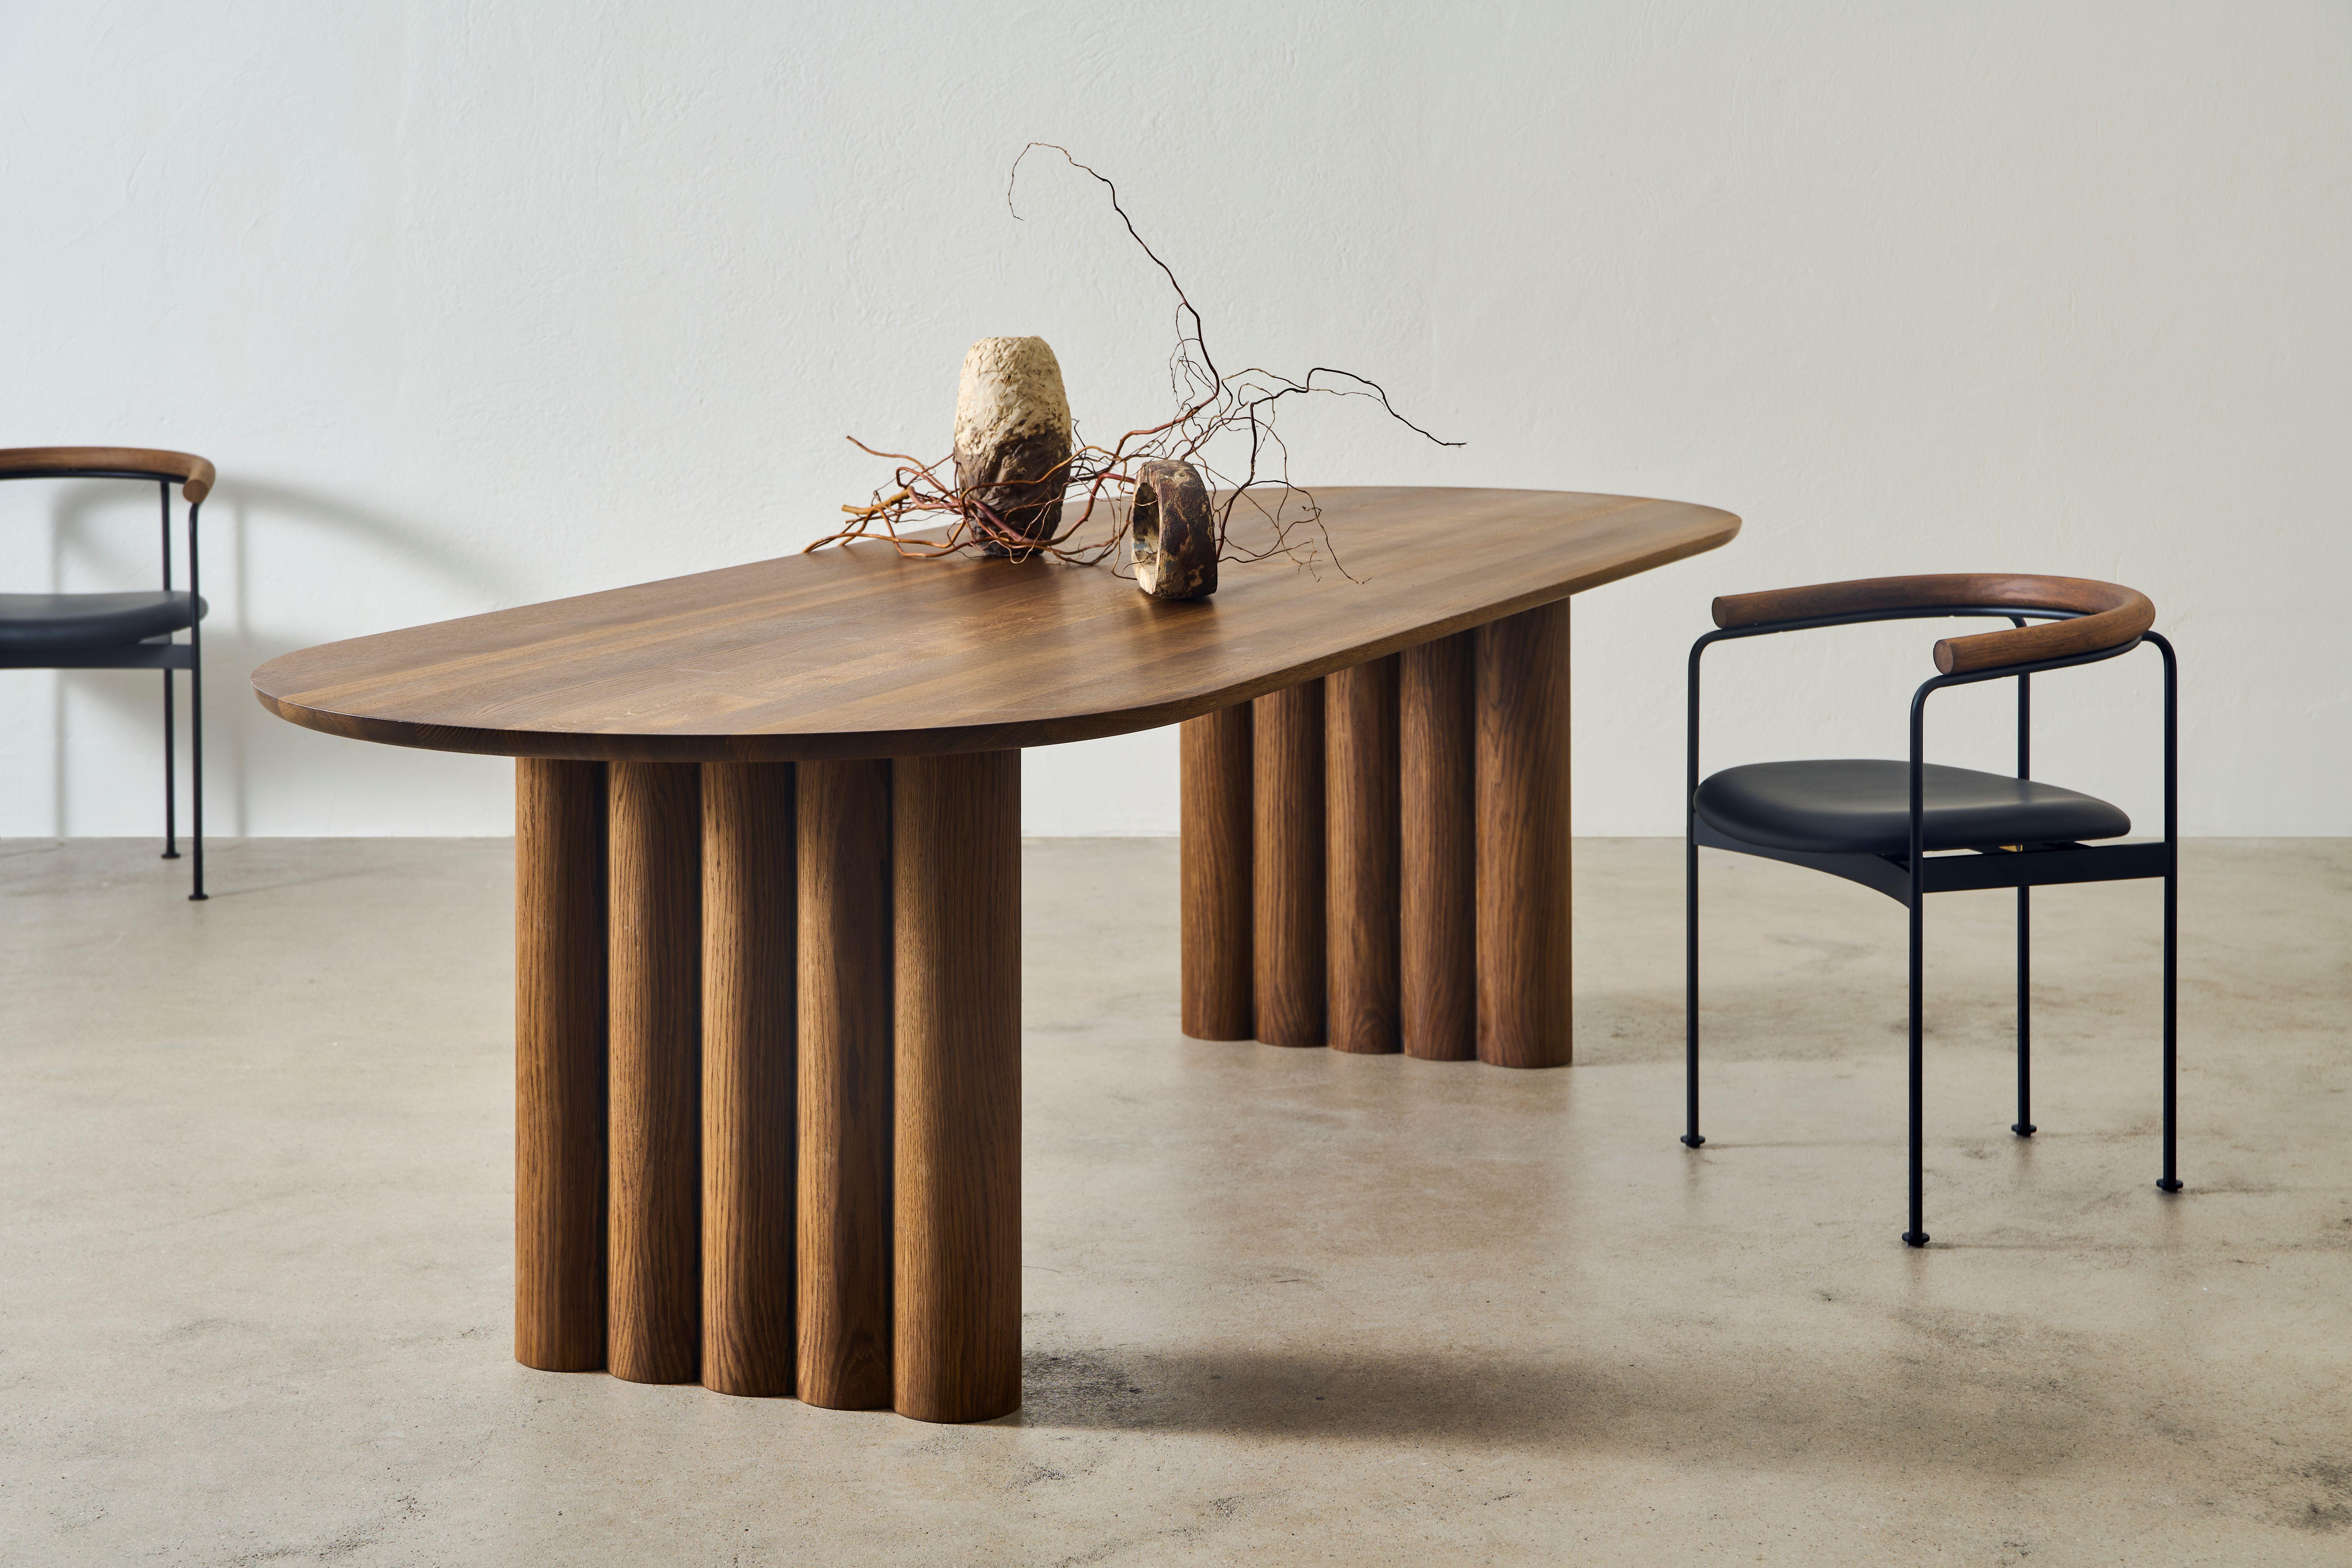 PLUSH dining table, oval, 200 cm.
Solid wood table top and legs. Handmade in Denmark. 
Signed by Jacob Plejdrup for DK3

Table's height: 72 or 74 cm
Table top’s thickness: 30 (in picture) or 40mm
Legs width: 130mm (in picture) or 150mm

Table top